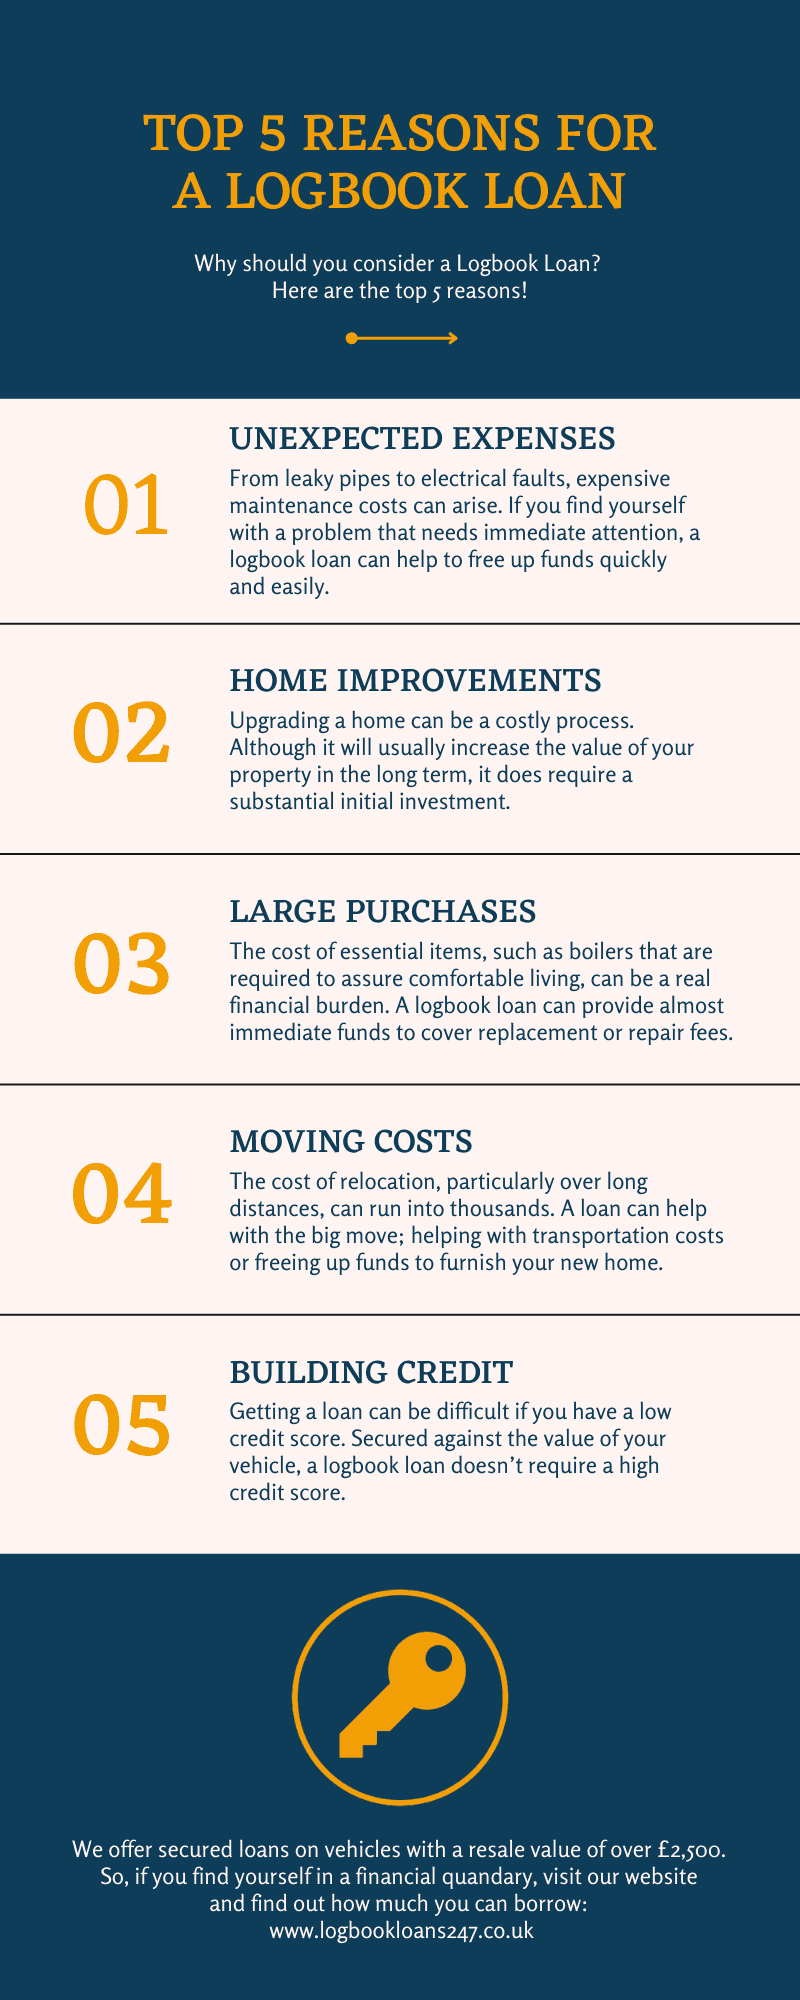 Top 5 reasons for a logbook loan pamphlet